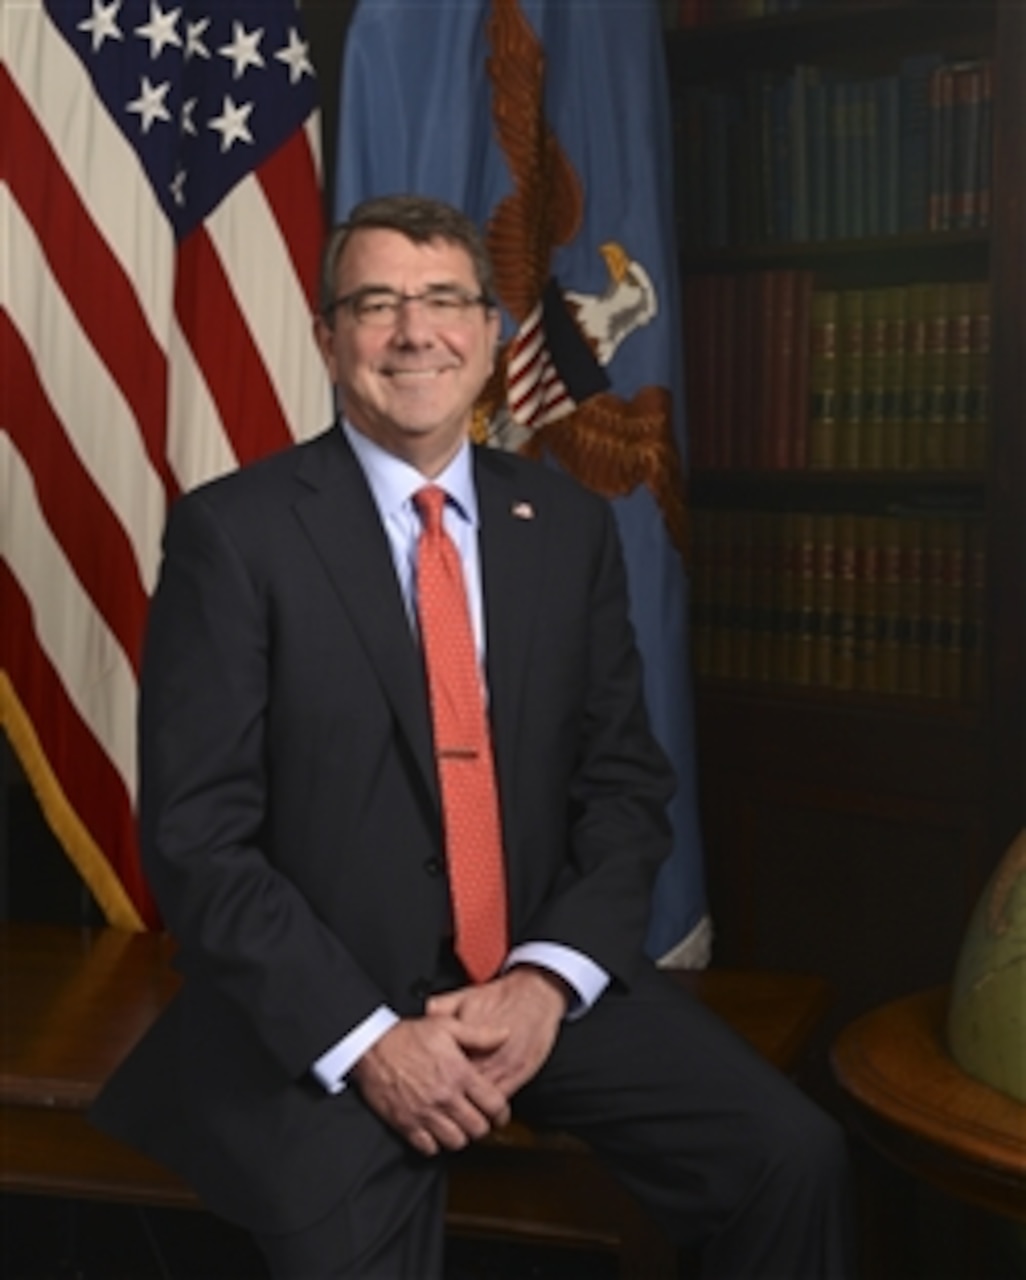 Defense Secretary Ash Carter will begin a two-day trip to Silicon Valley in Northern California on April 23, 2015. During the visit, he will deliver a speech at Stanford University, visit the Facebook campus in Menlo Park, and meet with executives at the $4 billon venture-capital firm Andreessen Horowitz. DoD official portrait